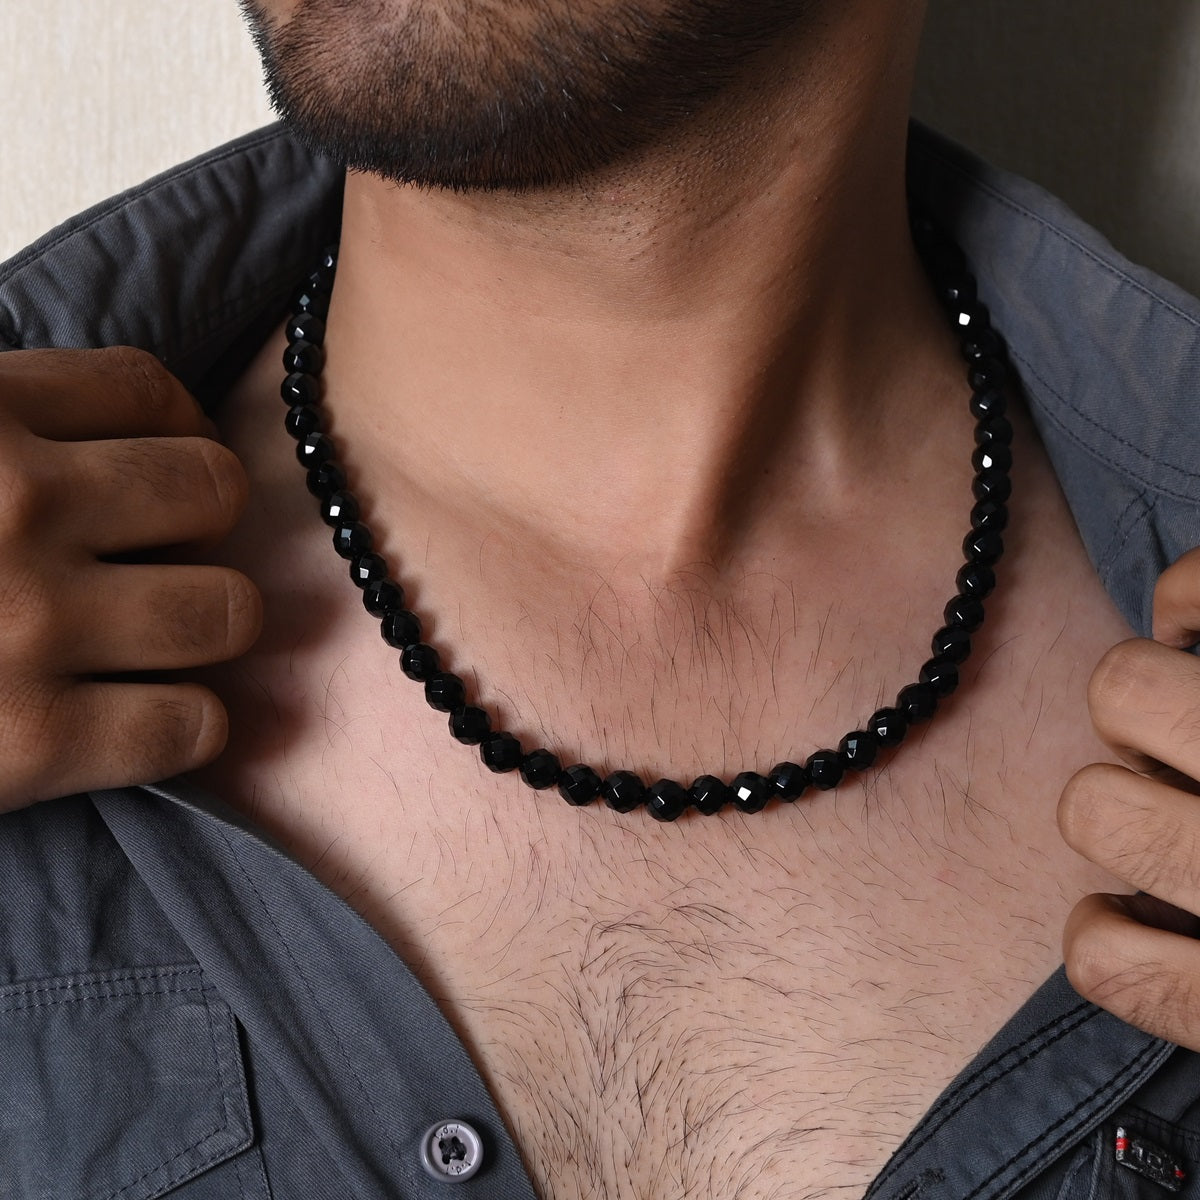 Men's Black Onyx Gemstone Silver Necklace: Confident and stylish accessory